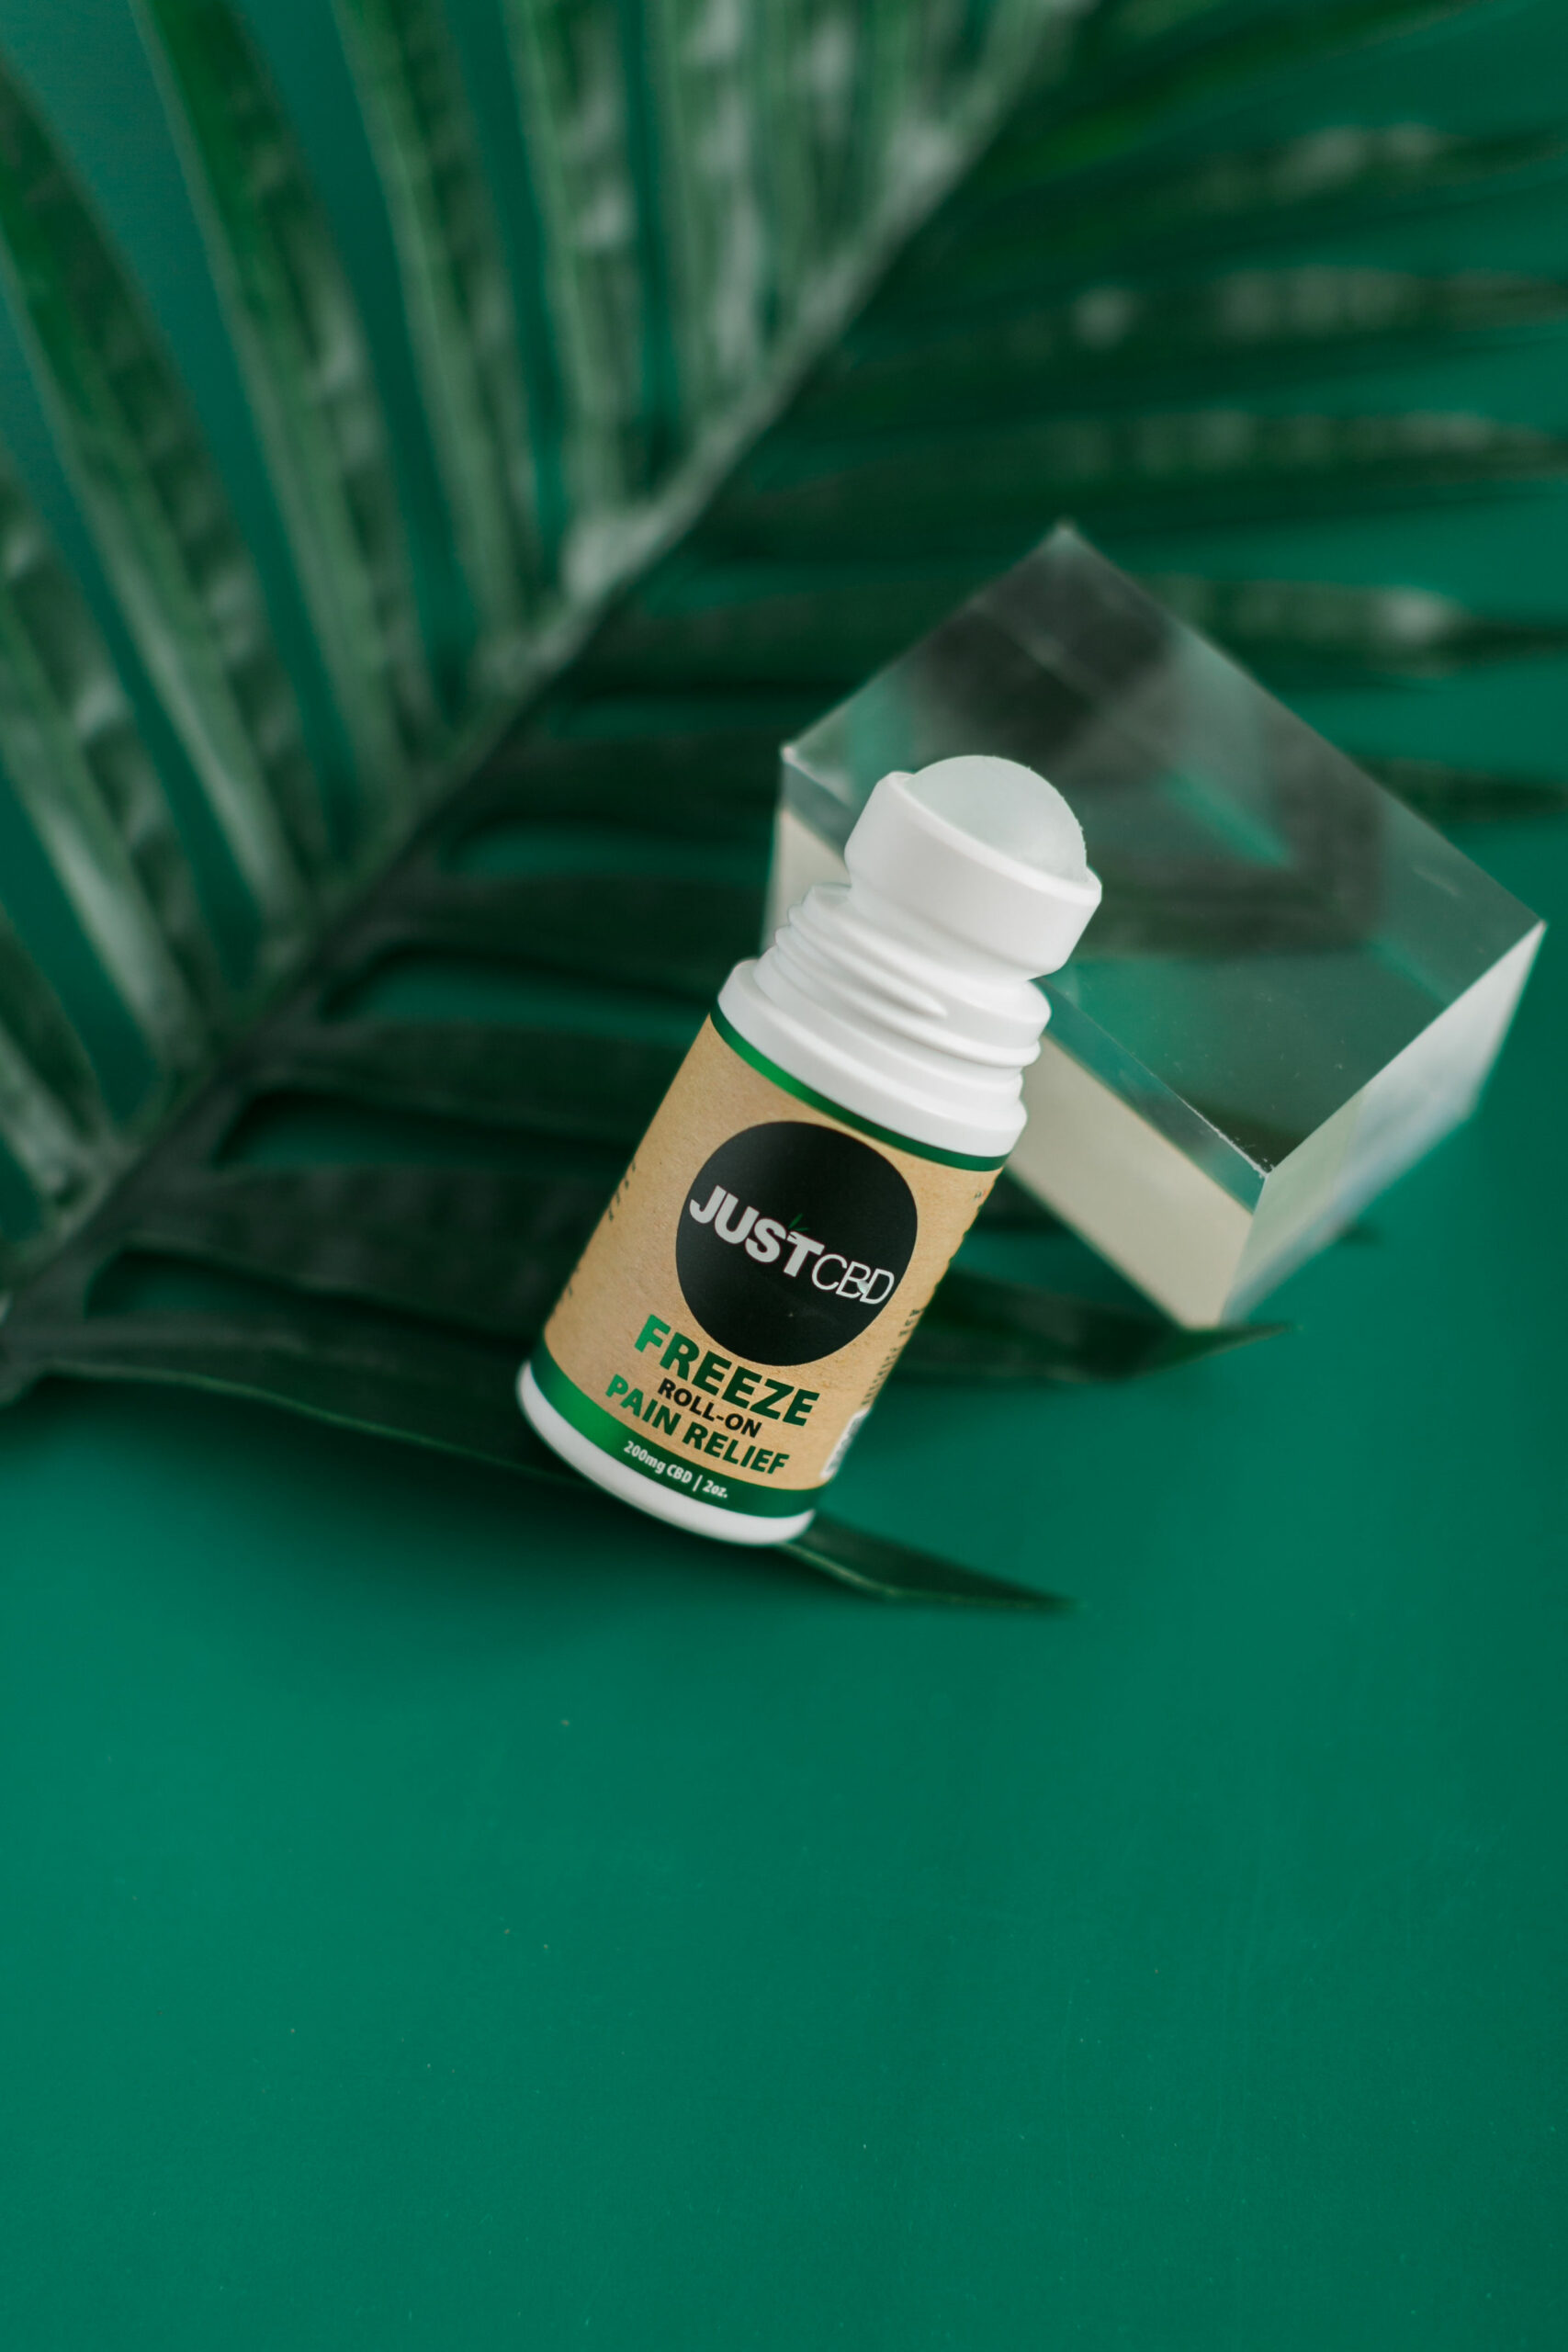 IS CBD OIL GOOD FOR POST-SURGERY PAIN RELIEF?